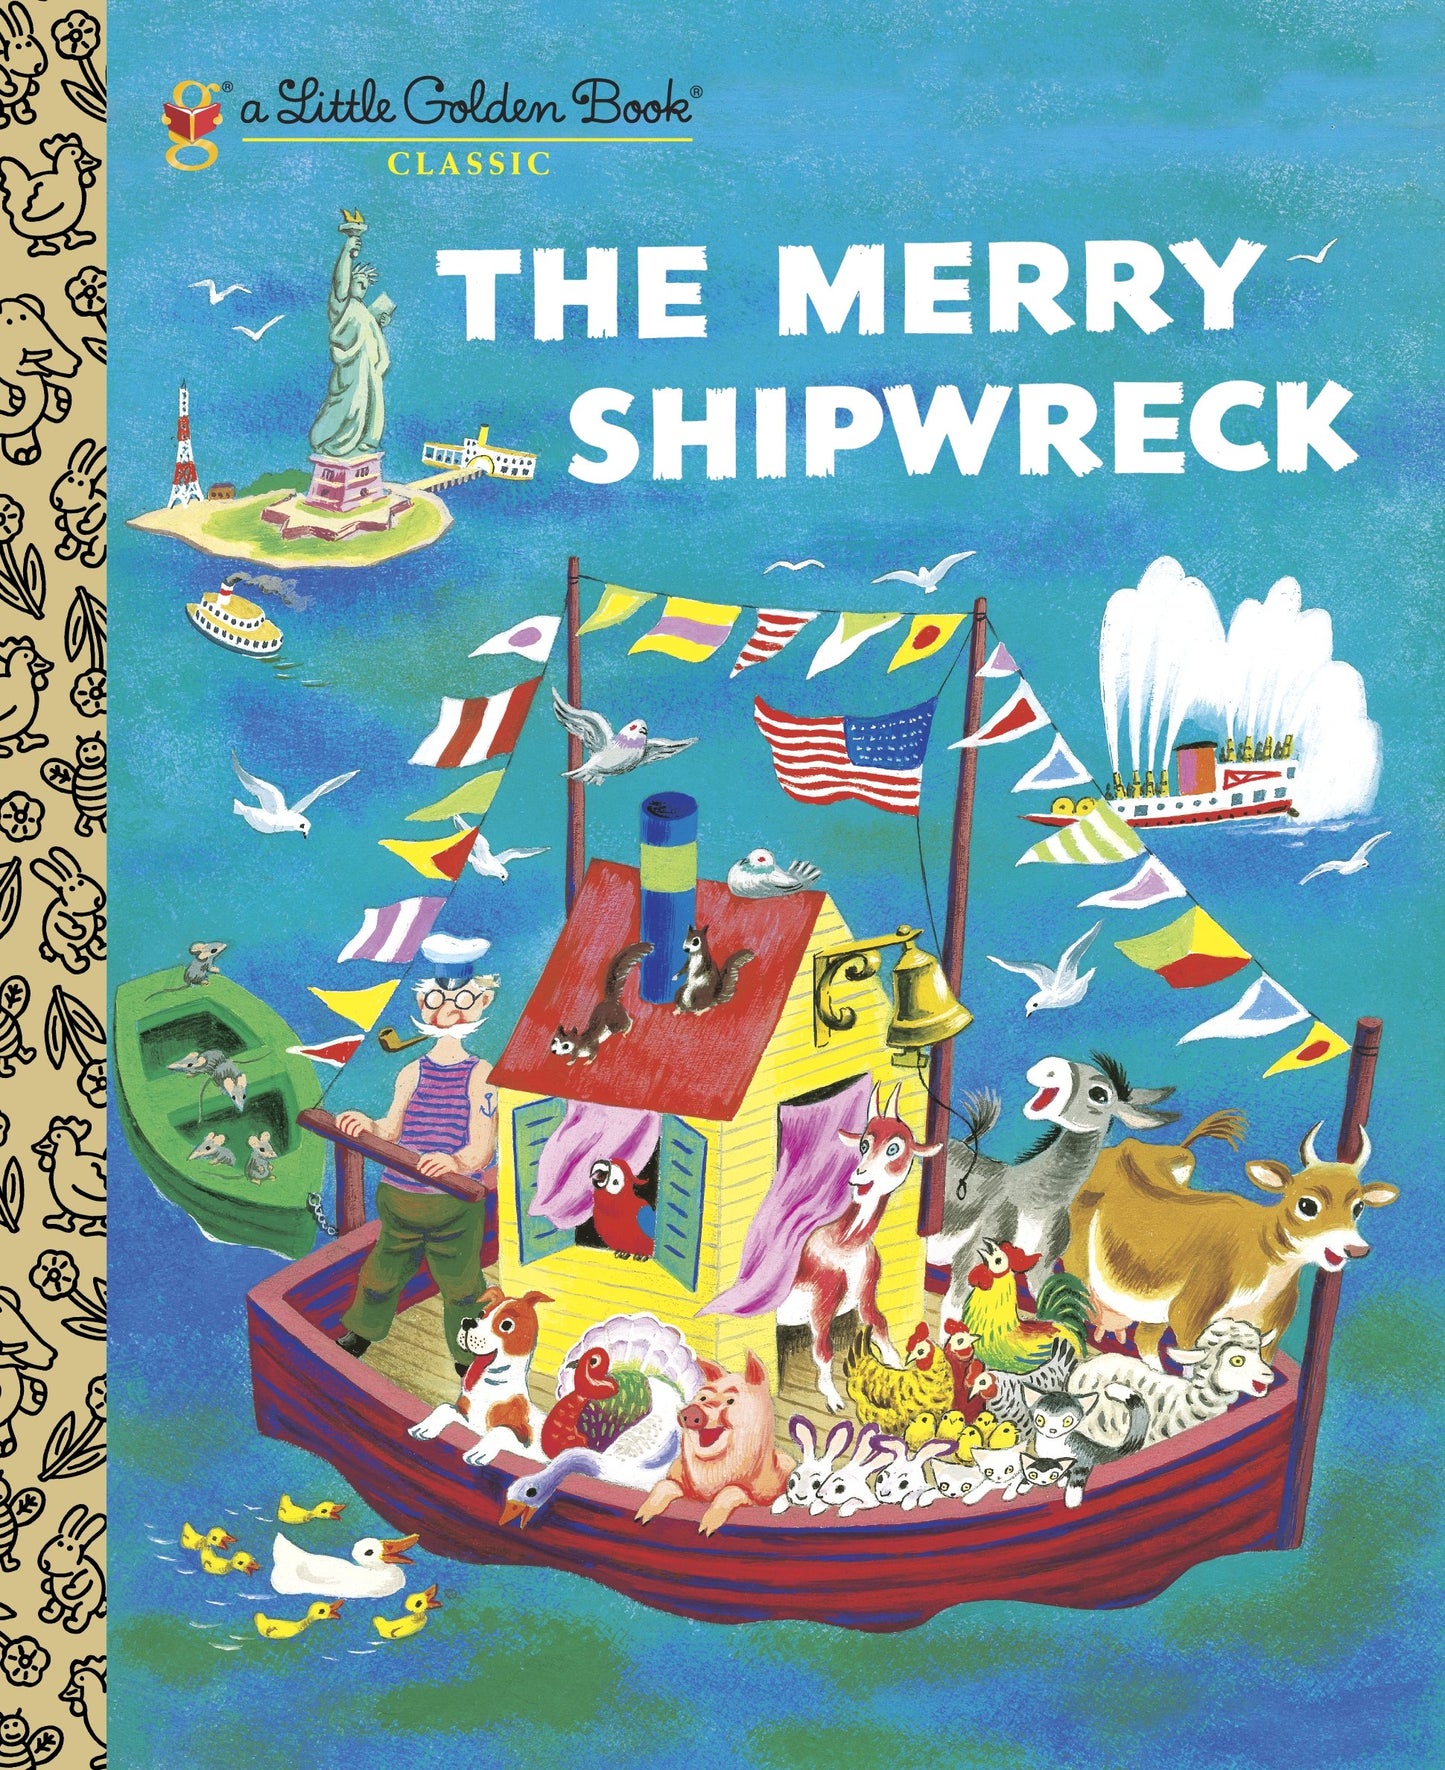 THE MERRY SHIPWRECK